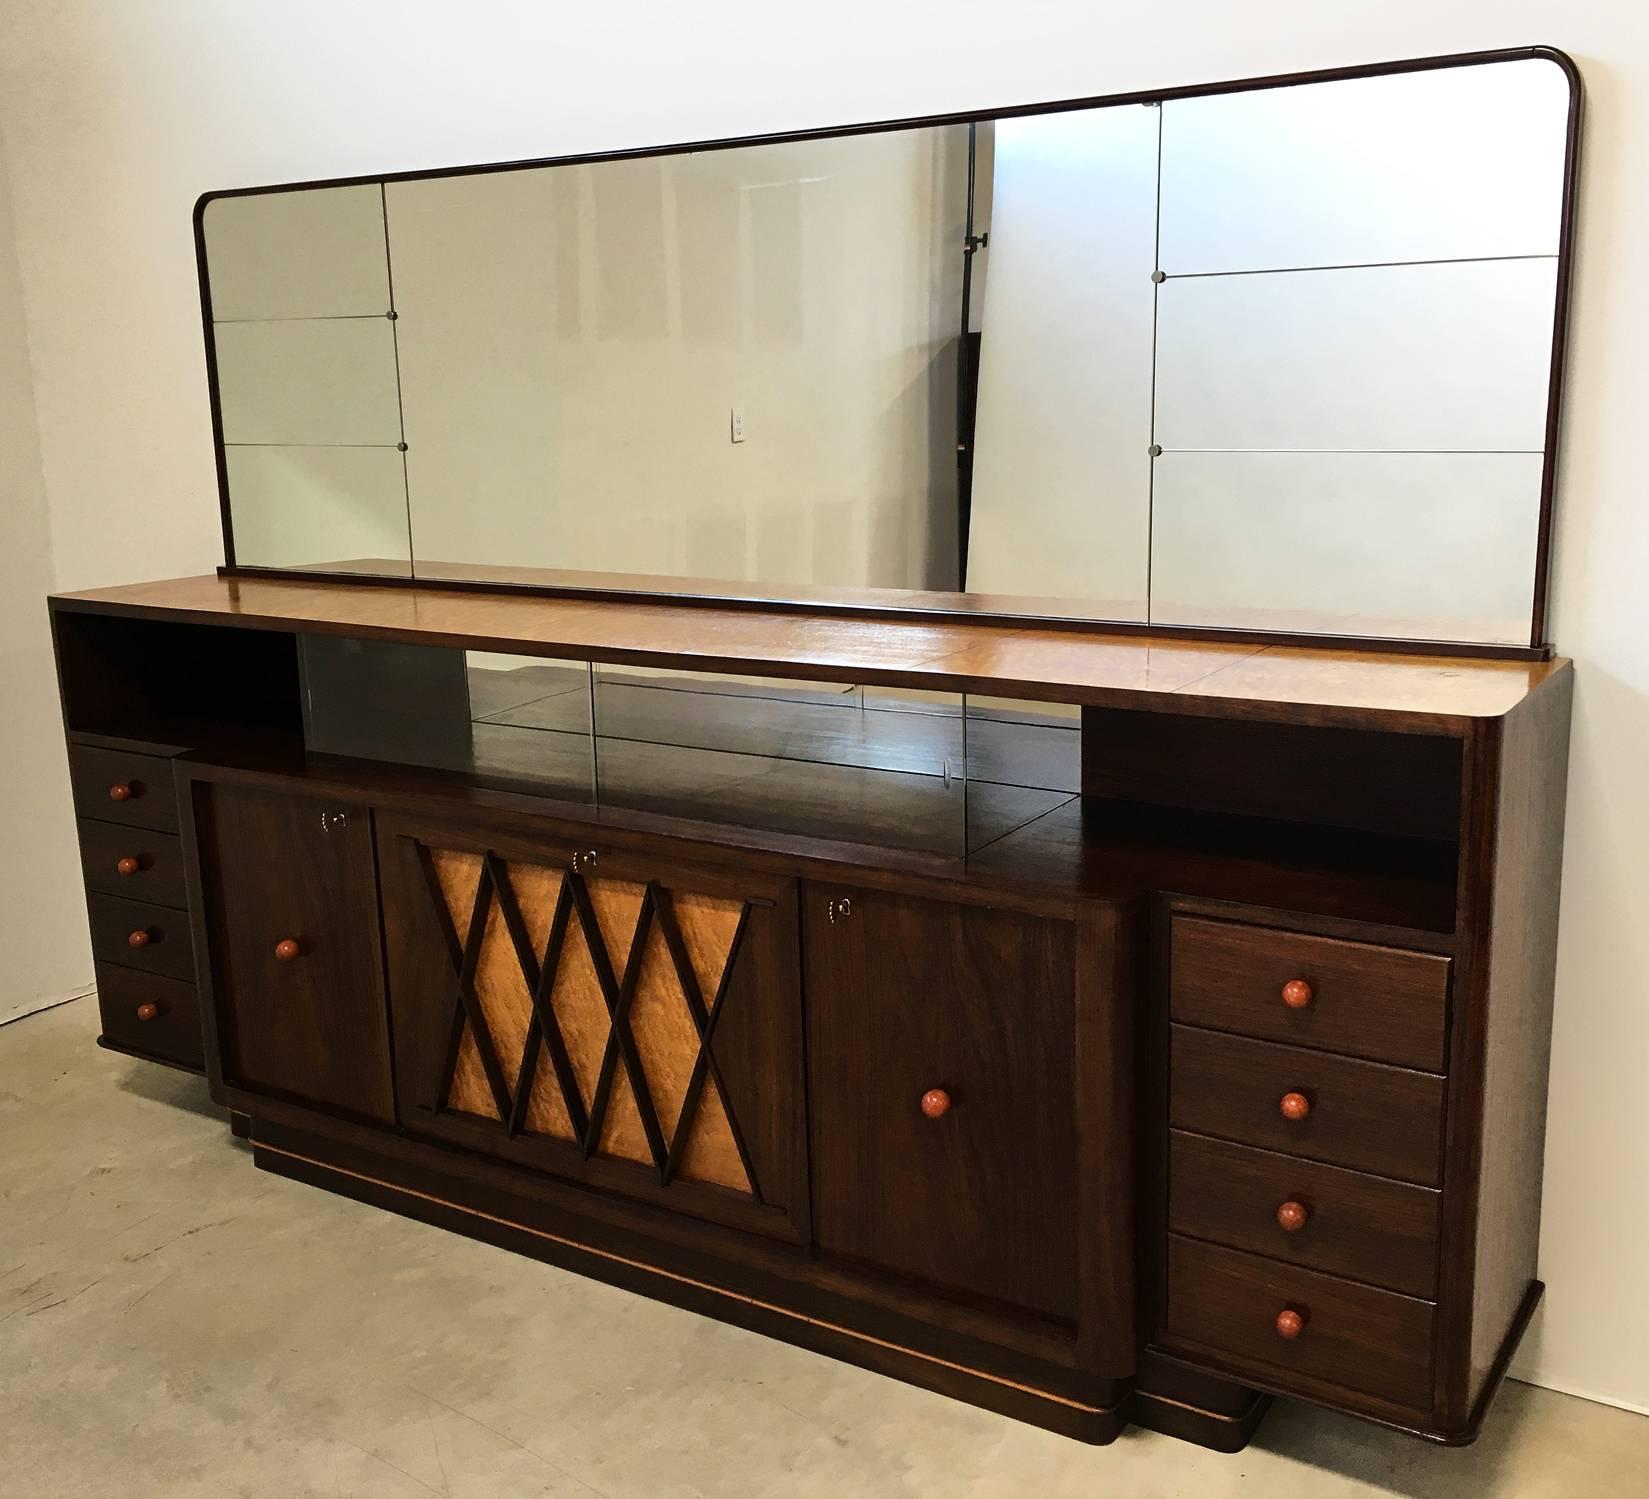 Superb four-door and eight-drawer sideboard cabinet attributed to Osvaldo Borsani of beautiful mahogany, rosewood and burl elm woods. Modernist diamond pattern door inset pattern on front center doors of burl elmwood and rosewood; above is a